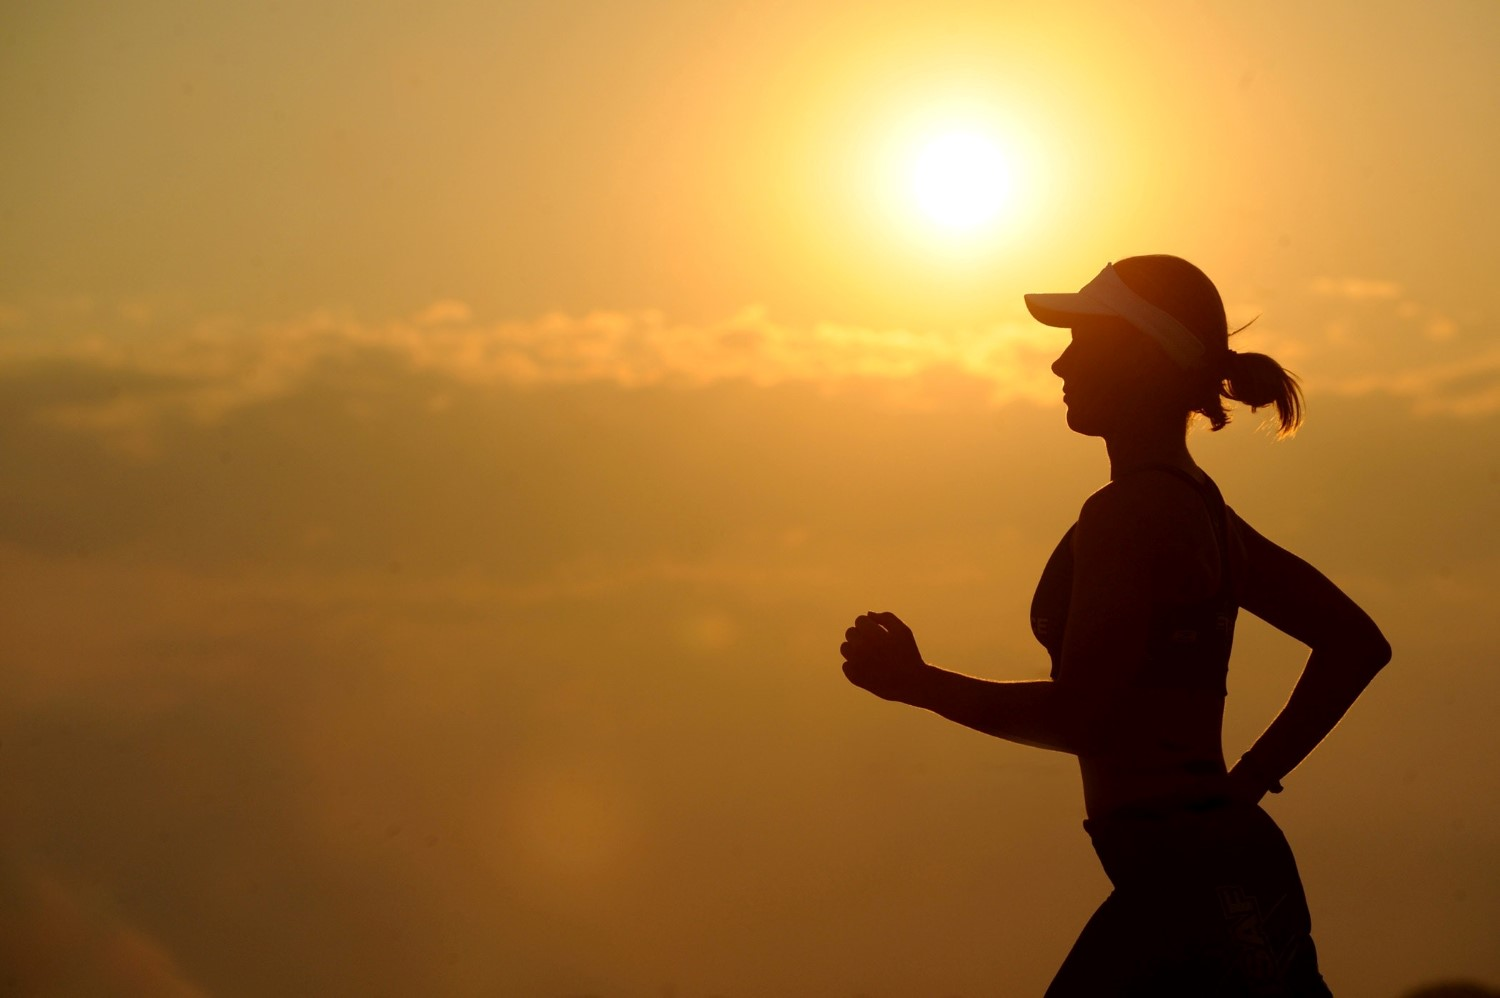 Exercise is one of the best ways to manage stress